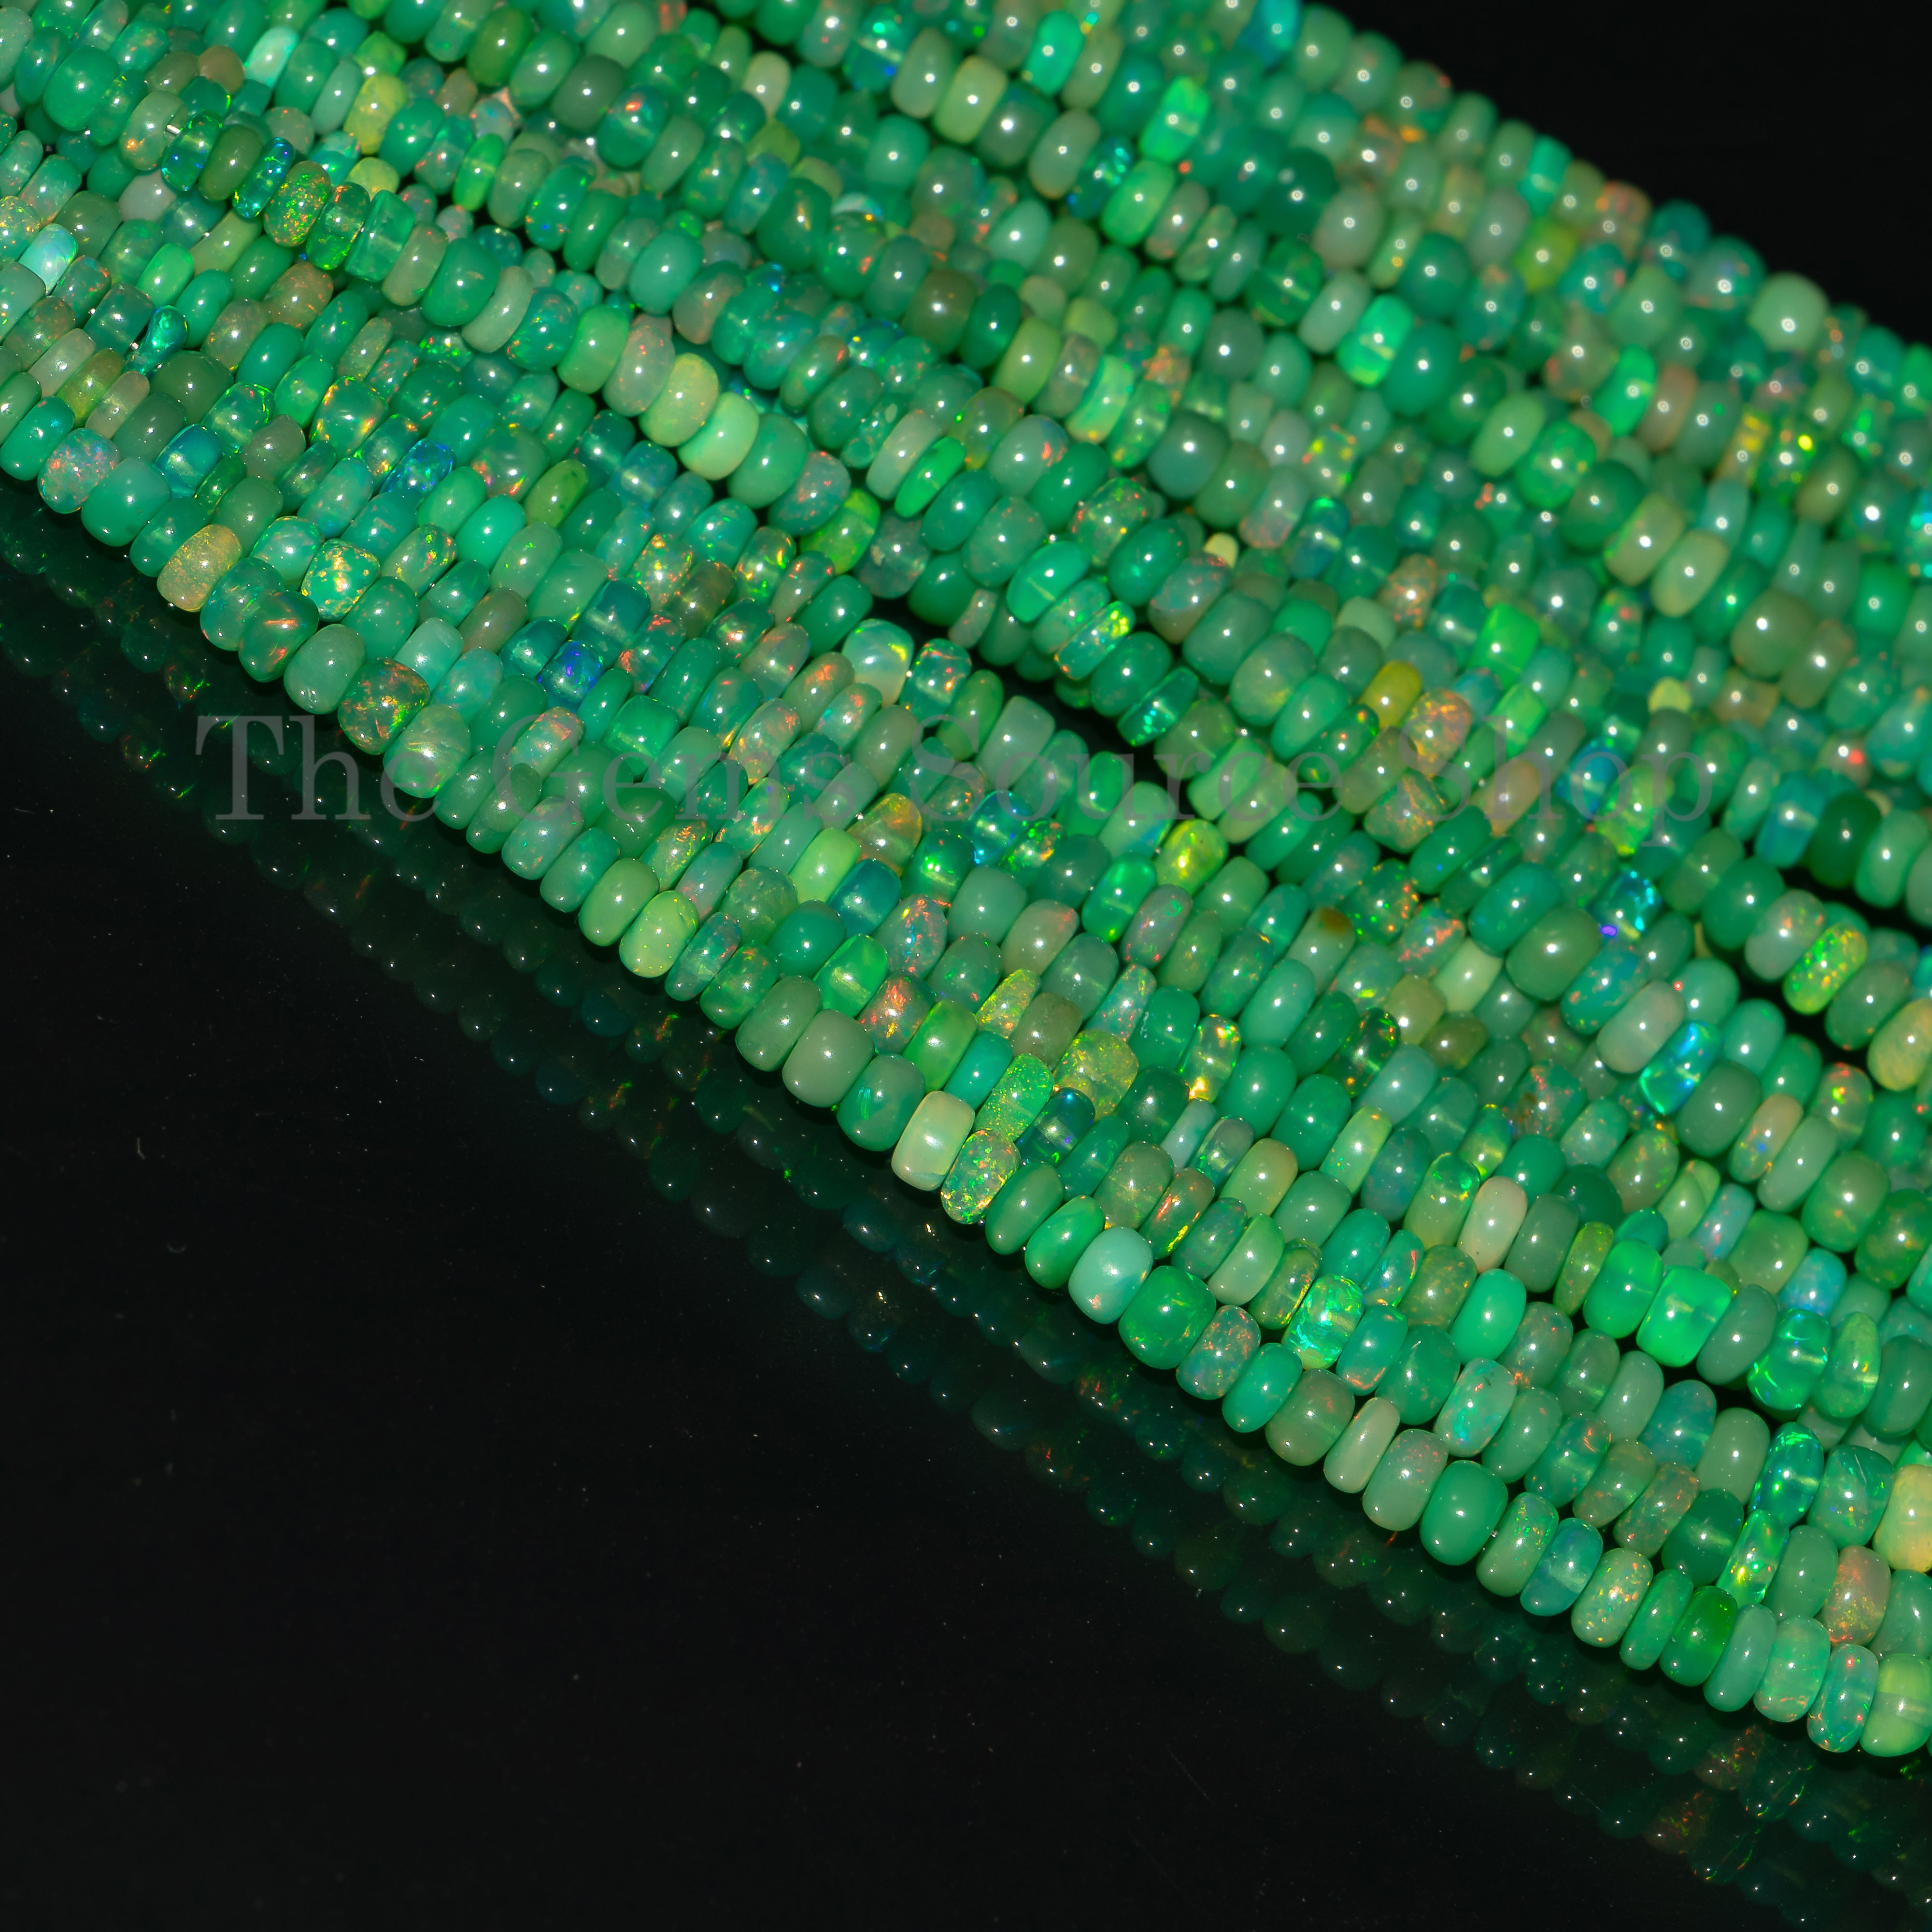 Flashy Green Opal Rondelle Gemstone 3-5.25 mm Smooth Beads TGS-4653